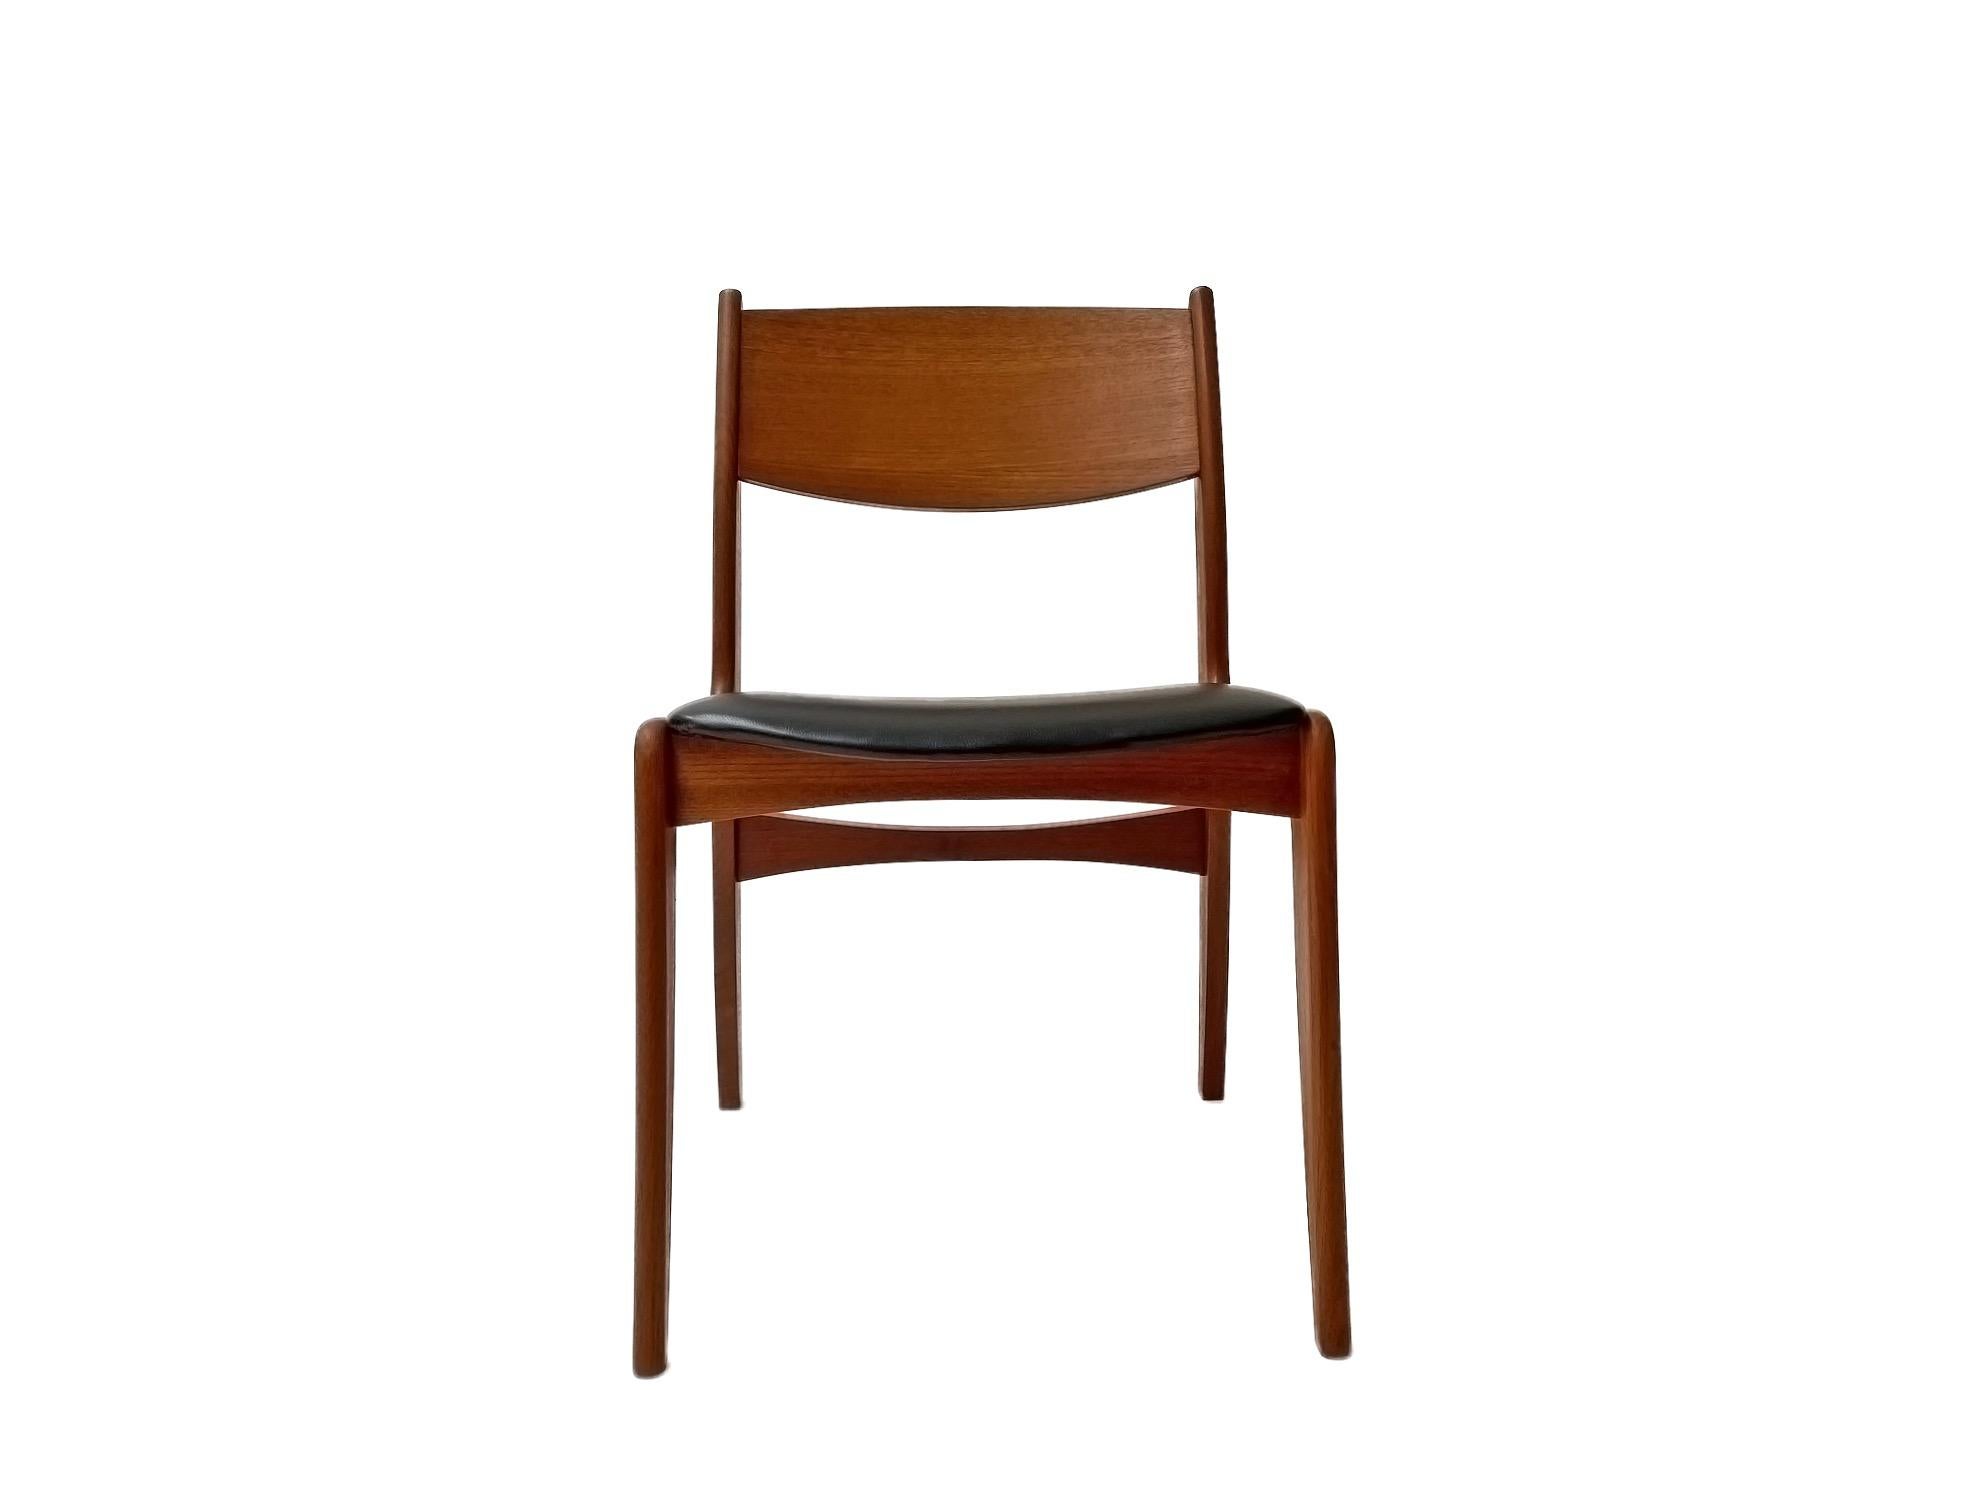 A beautiful set of 4 Danish teak & black vinyl dining chairs, these would make a stylish addition to any dining area.

The chairs have wide seat pads and sculptured timber backrests for enhanced comfort. A striking piece of classically designed